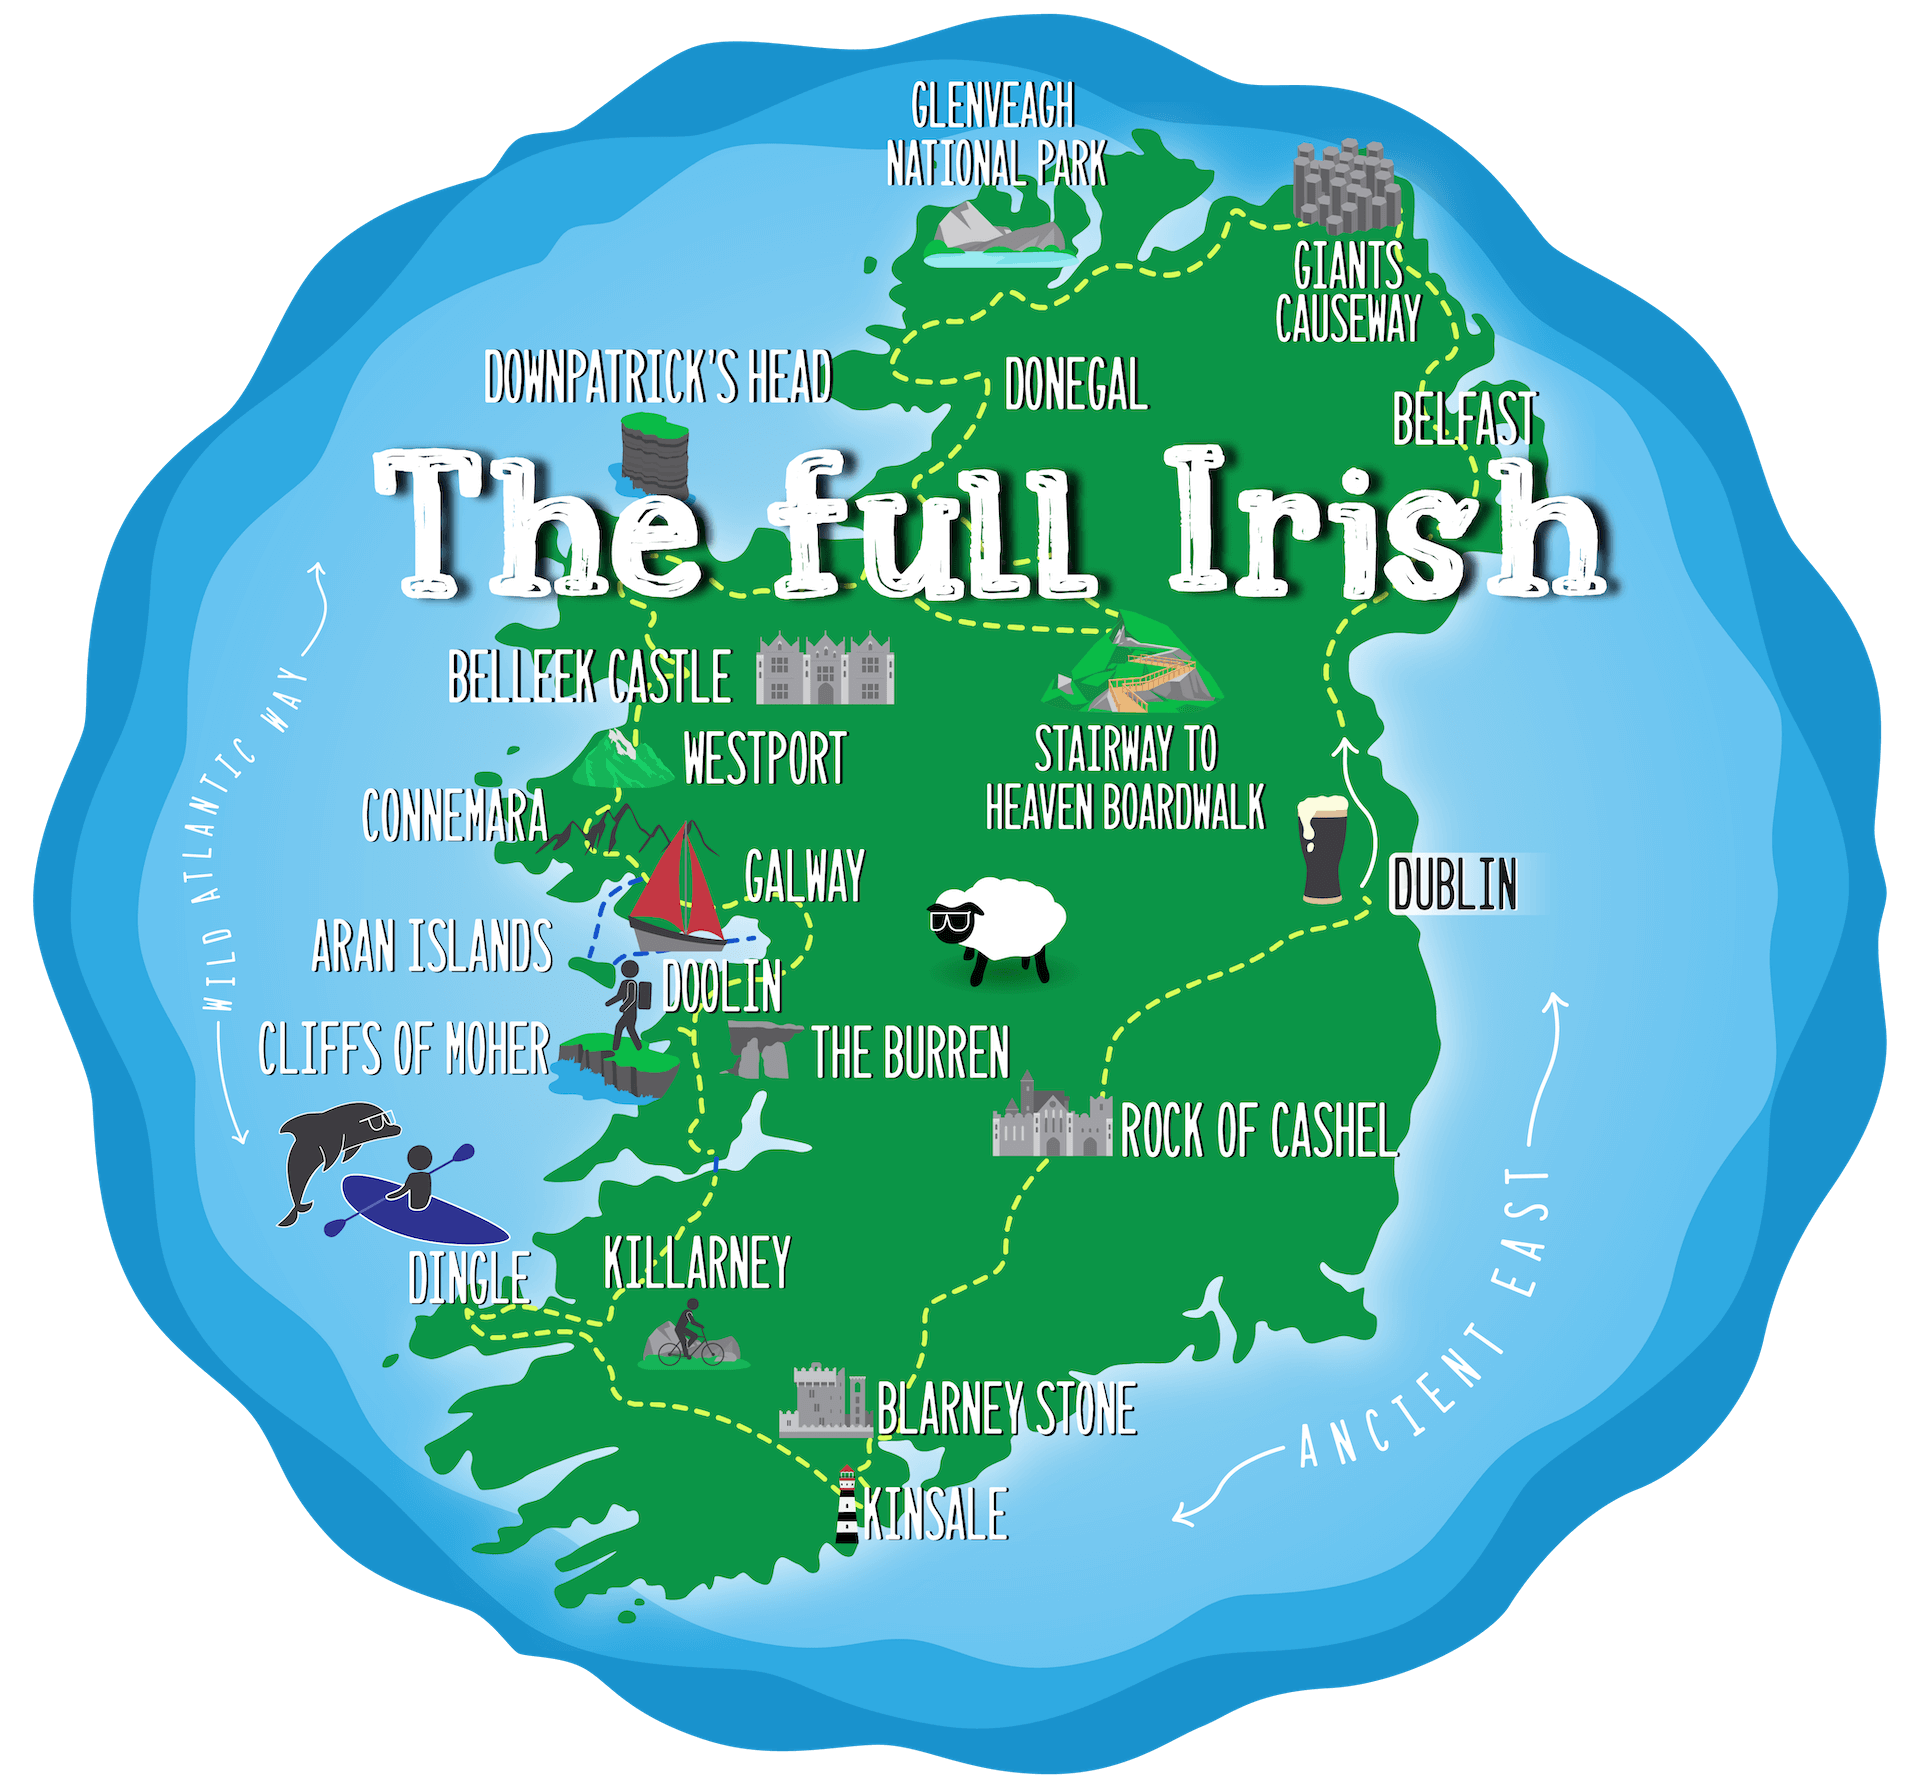 Illustrated map of Ireland highlighting tourist attractions and landmarks for self-drive tours.